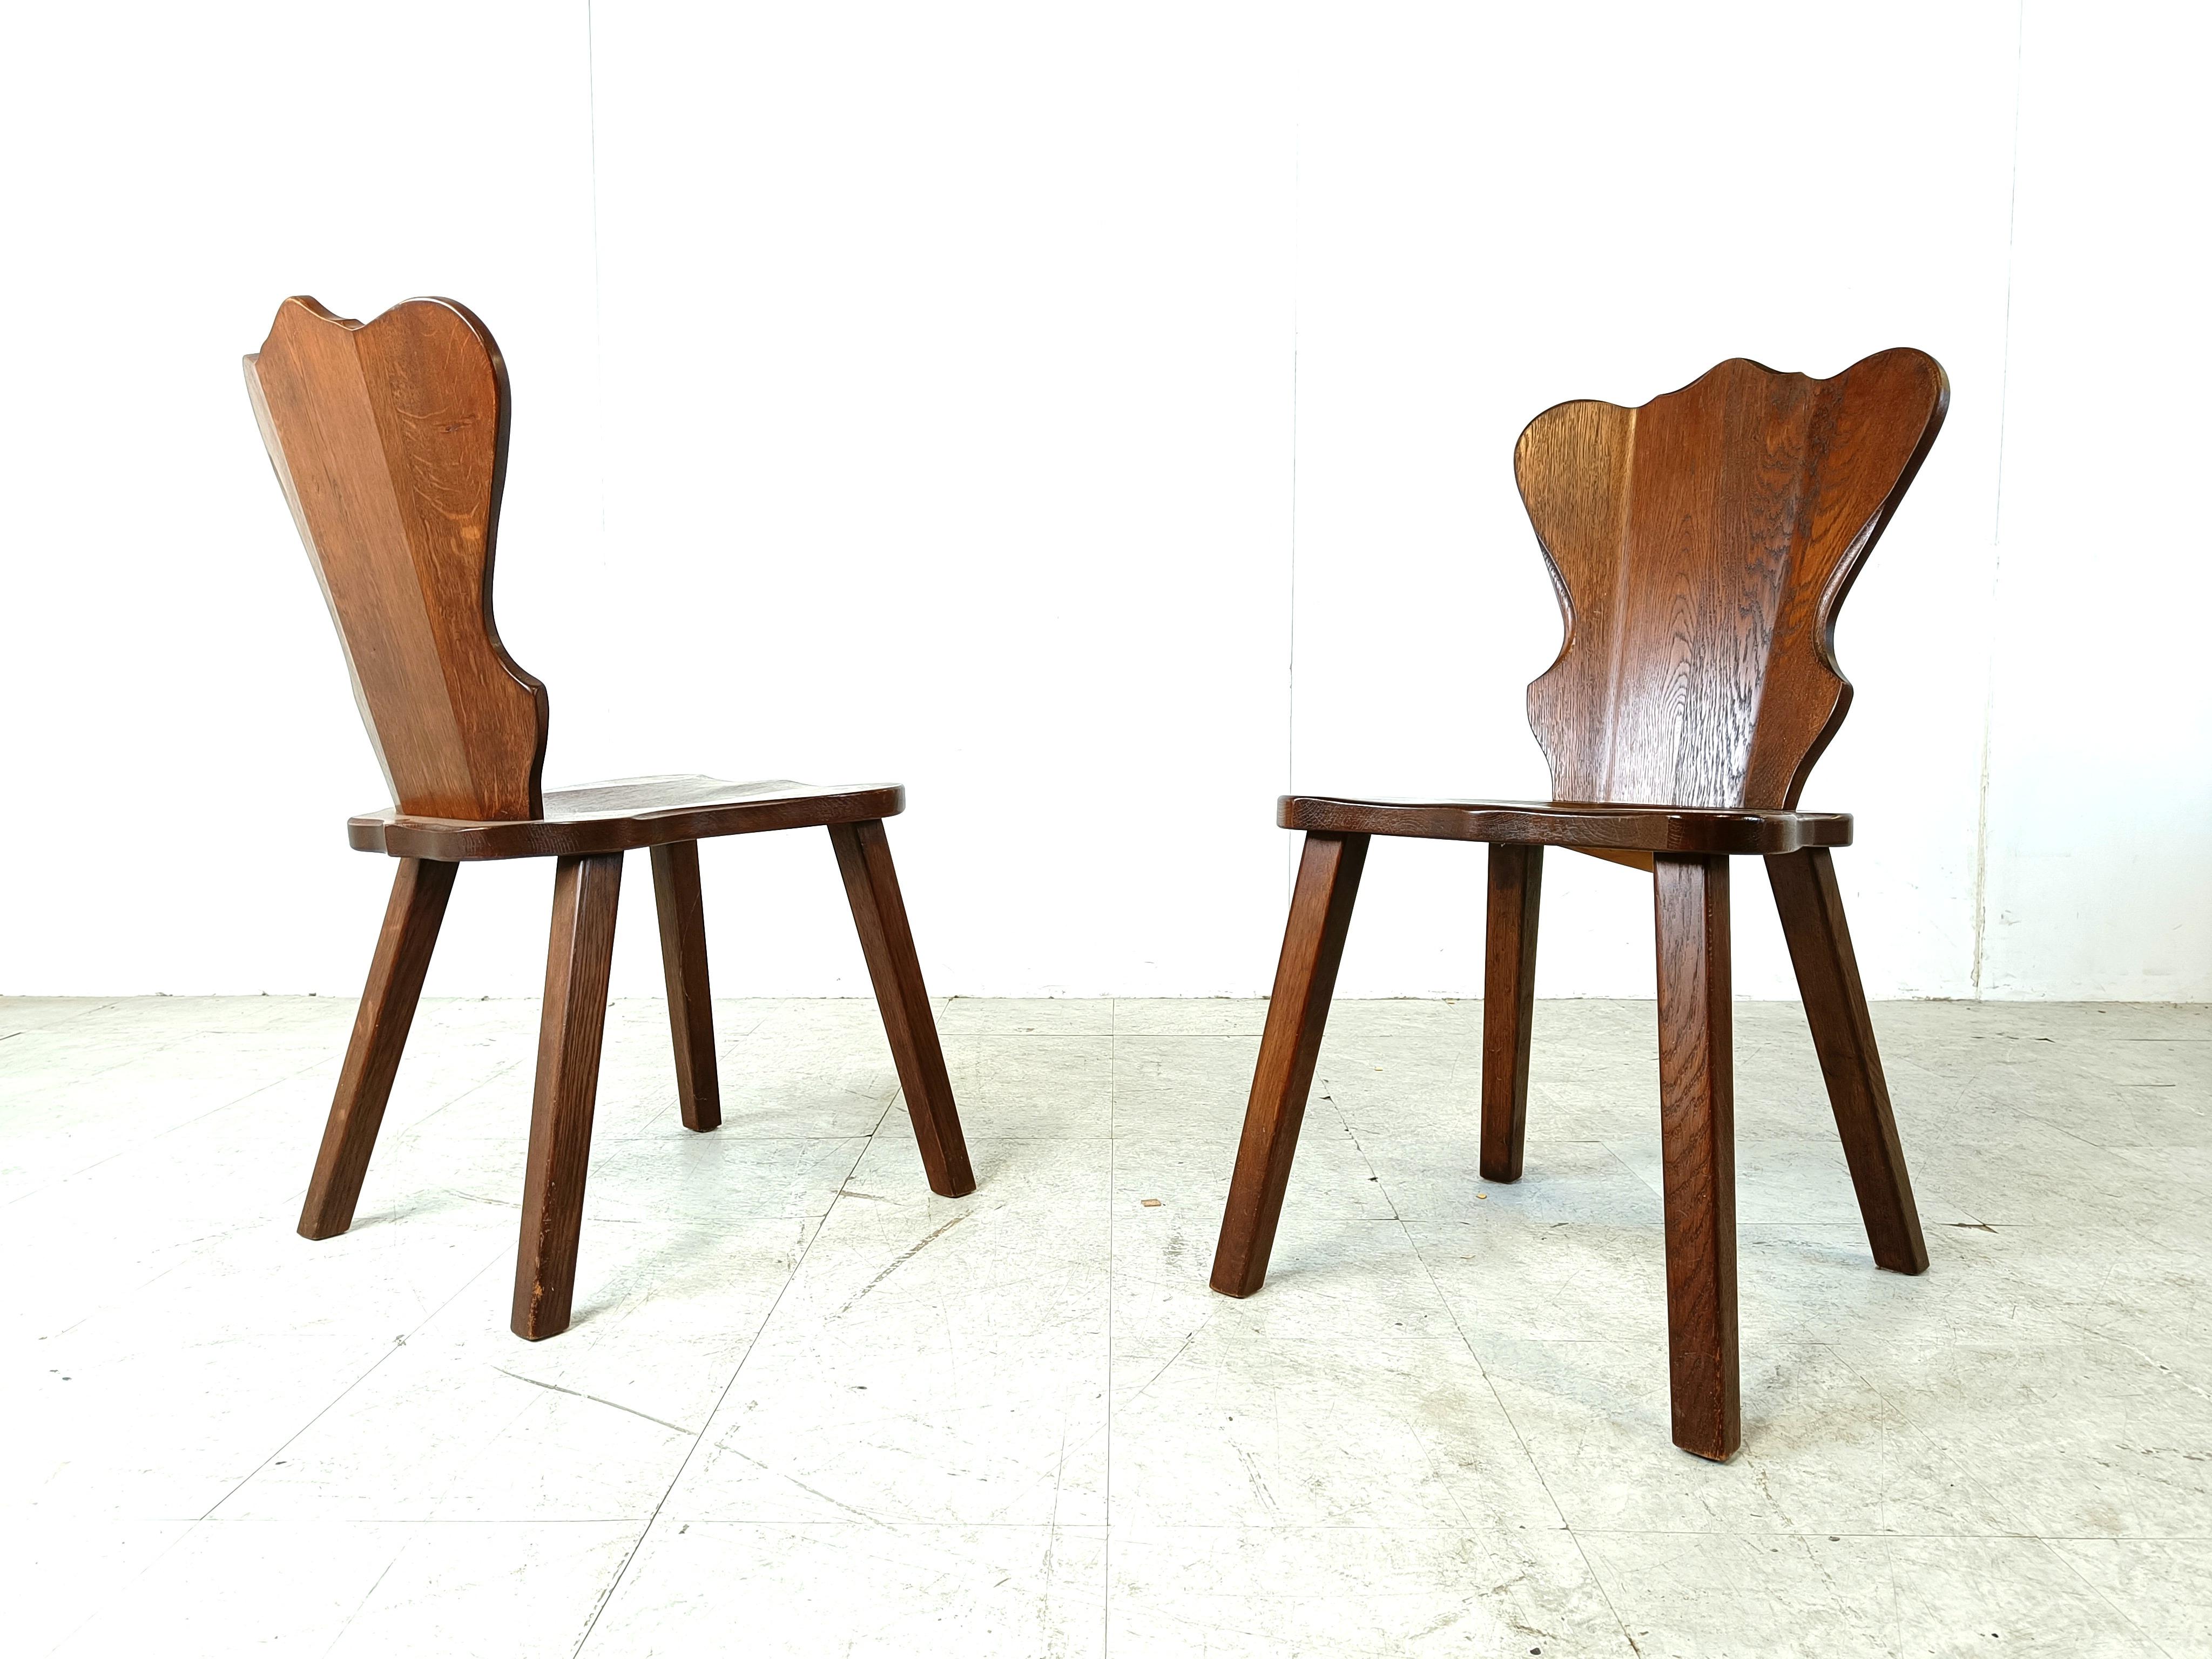 Vintage brutalist dining chairs, set of 6 - 1960s For Sale 1